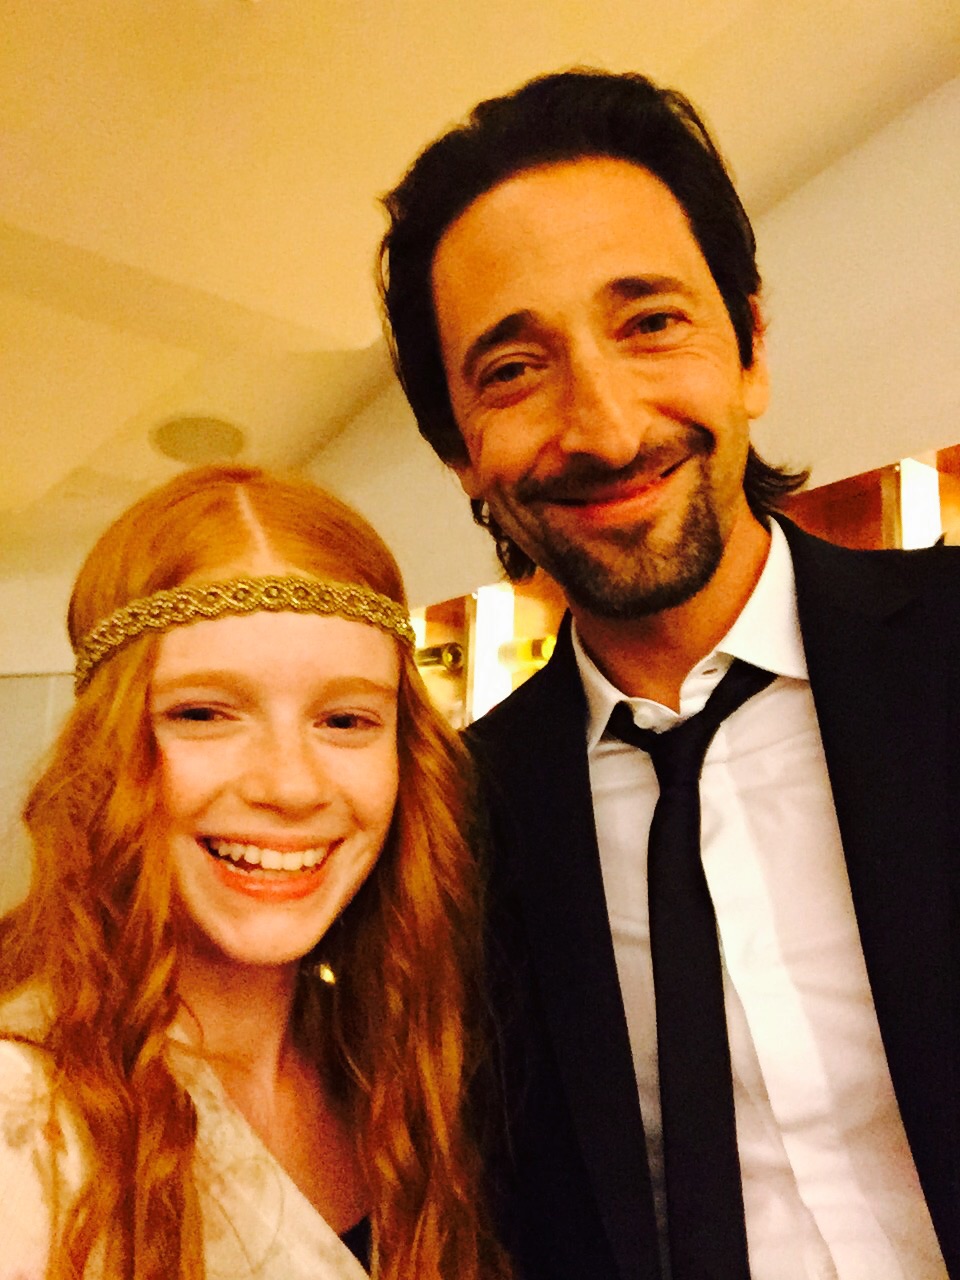 Tribeca premiere & red carpet - actress Hannah McCloud and academy award winner, Adrian Brody